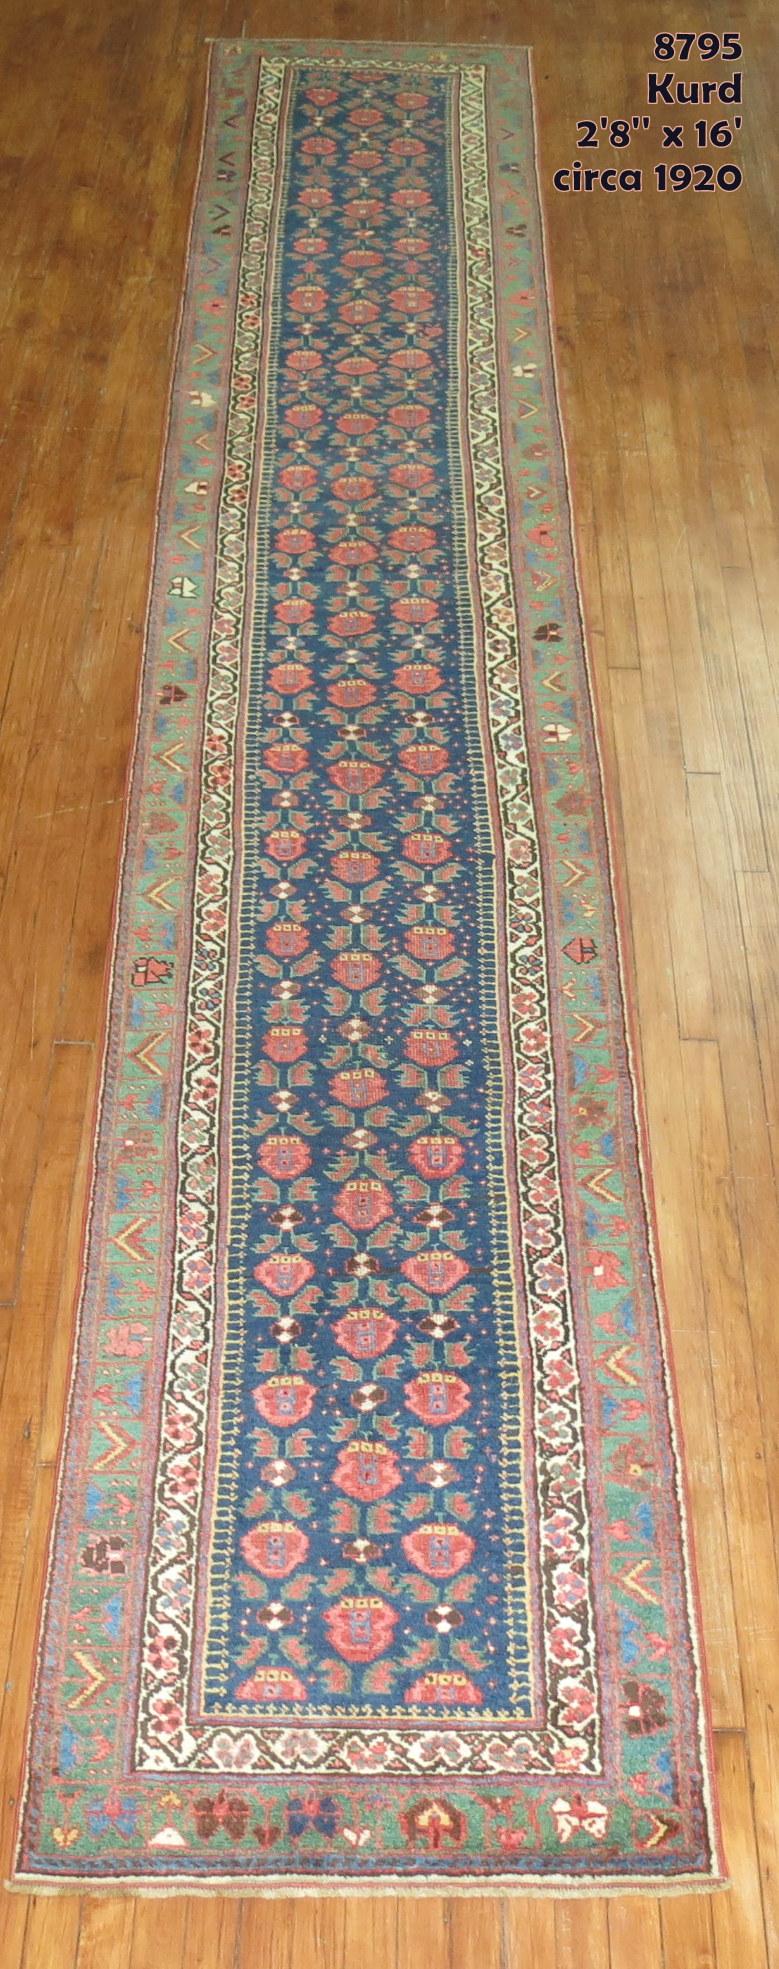 A narrow and long Persian runner with a floral design on a navy field, the border is green. Lot of different accent colors, predominantly in brown, rust, ivory and light blue, circa 1930.

Measures: 2'8